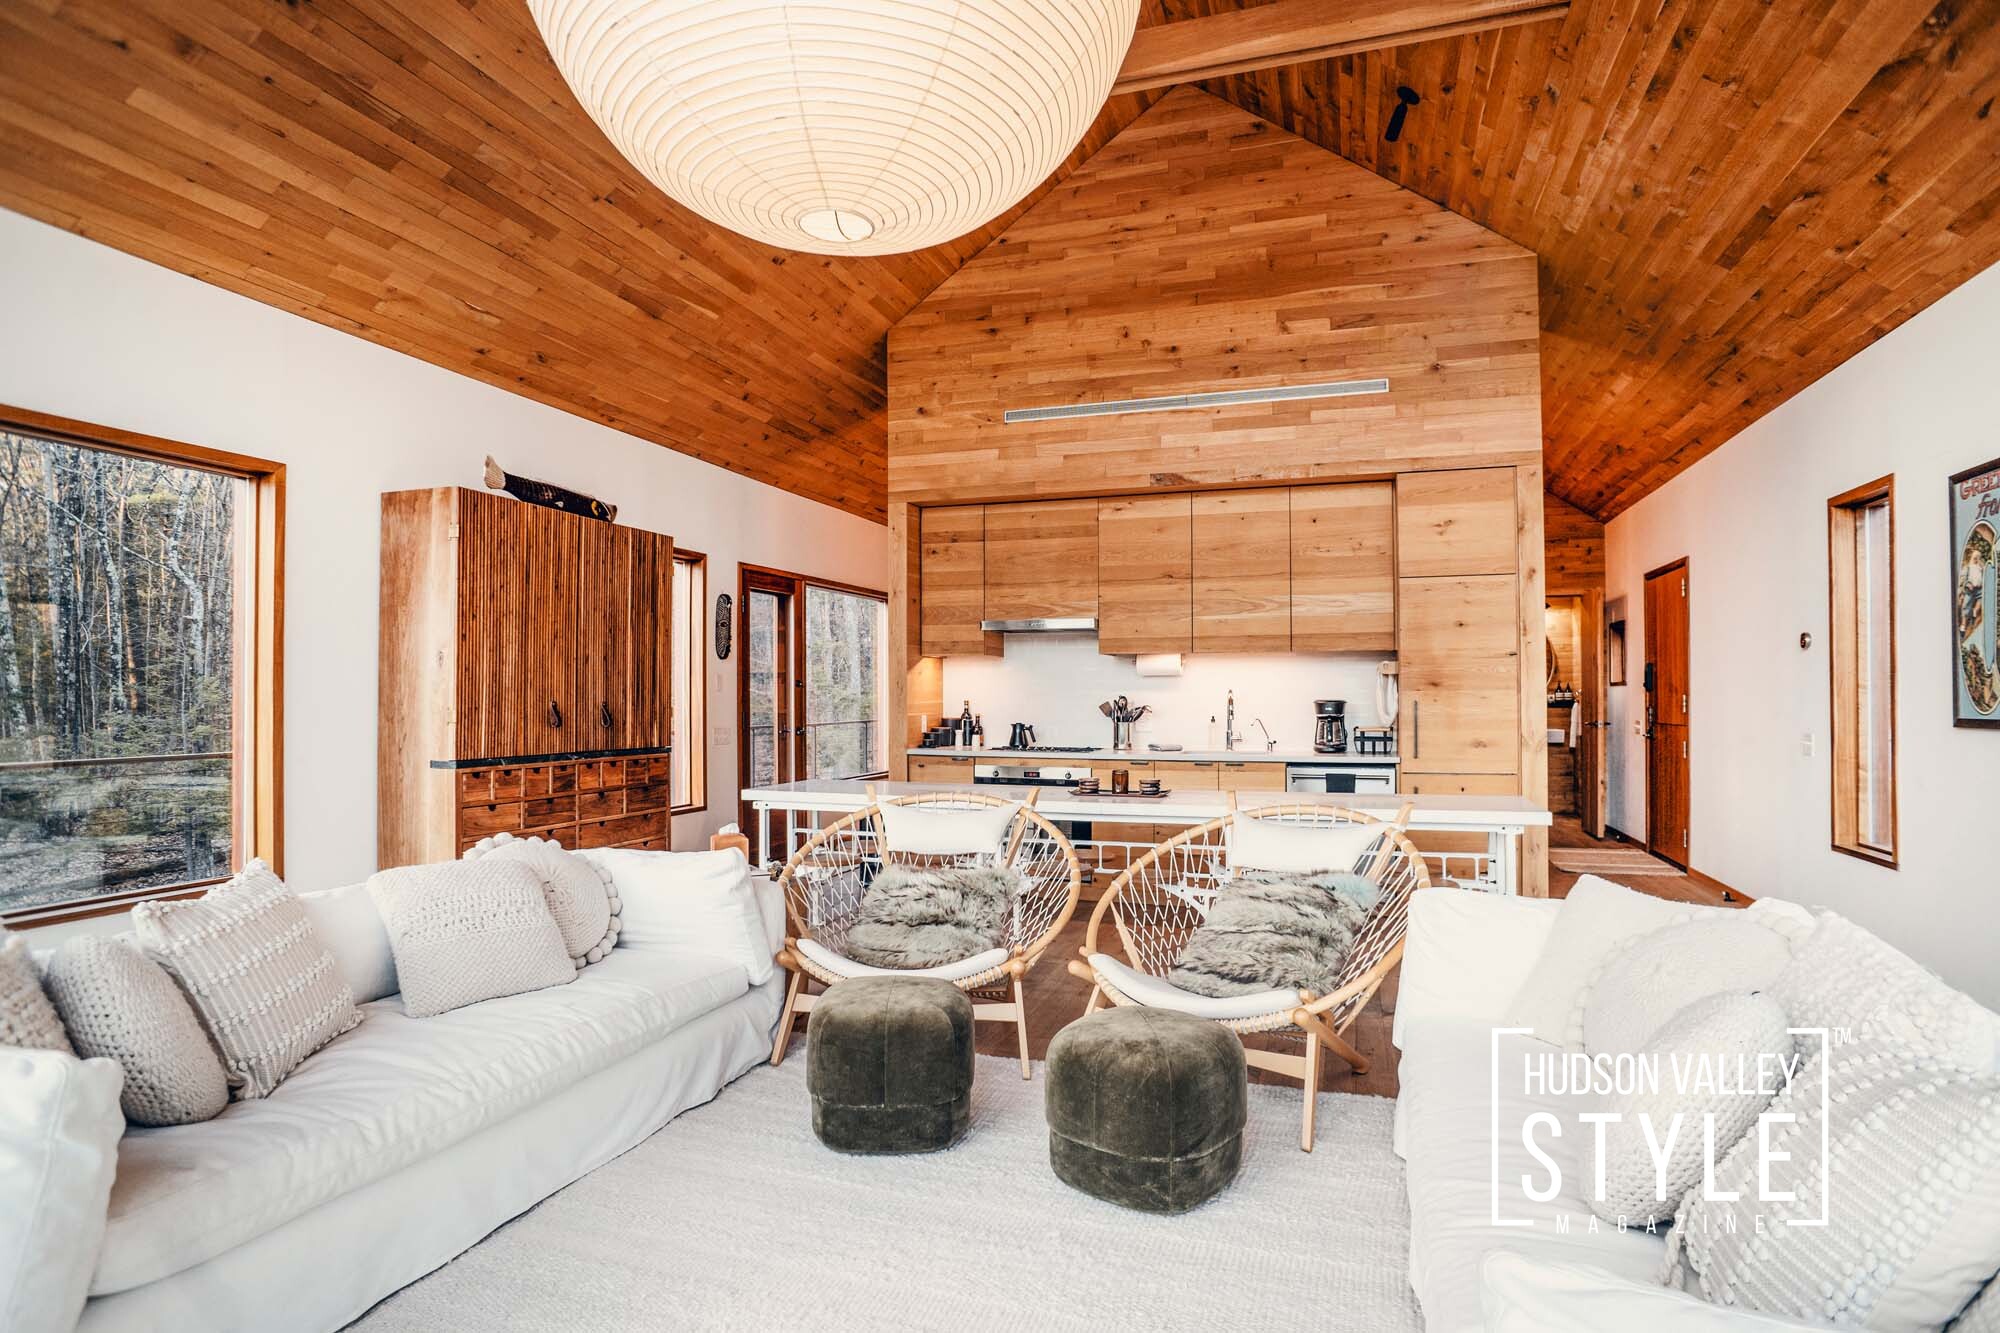 5 tips for designing a rustic and modern vacation home - Airbnb Photography by Alluvion Media